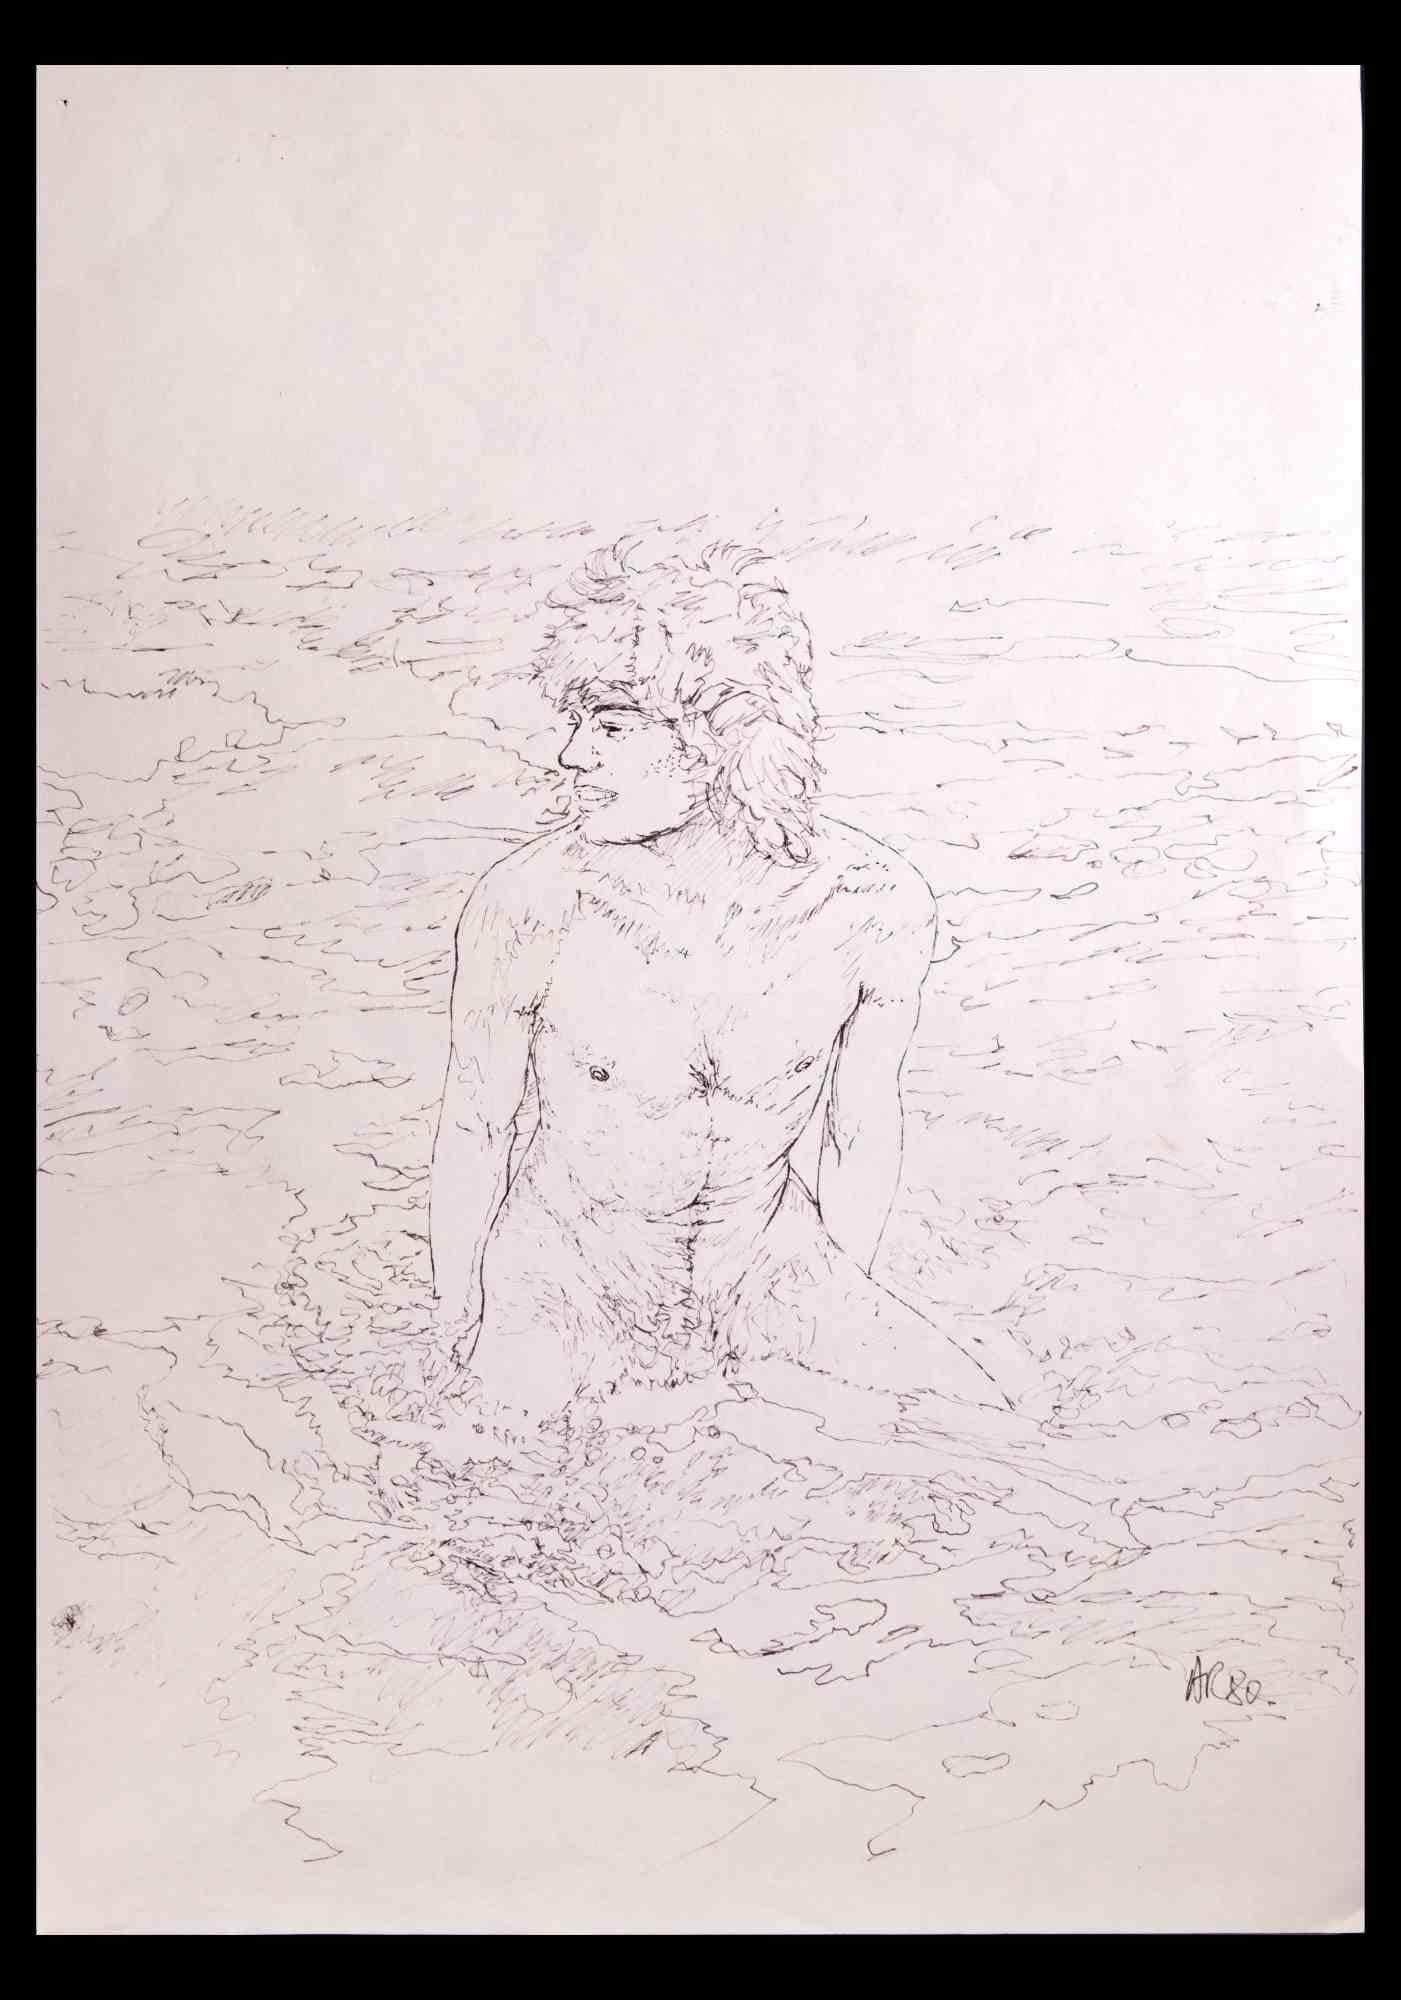  The boy at the sea   is an original drawing on pencil realized by Anthony Roaland in 1980. Hand-signed and dated by the artist on the lower right margin. 

In the foreground the boy is depicted with a happy and spontaneous look

Good conditions.